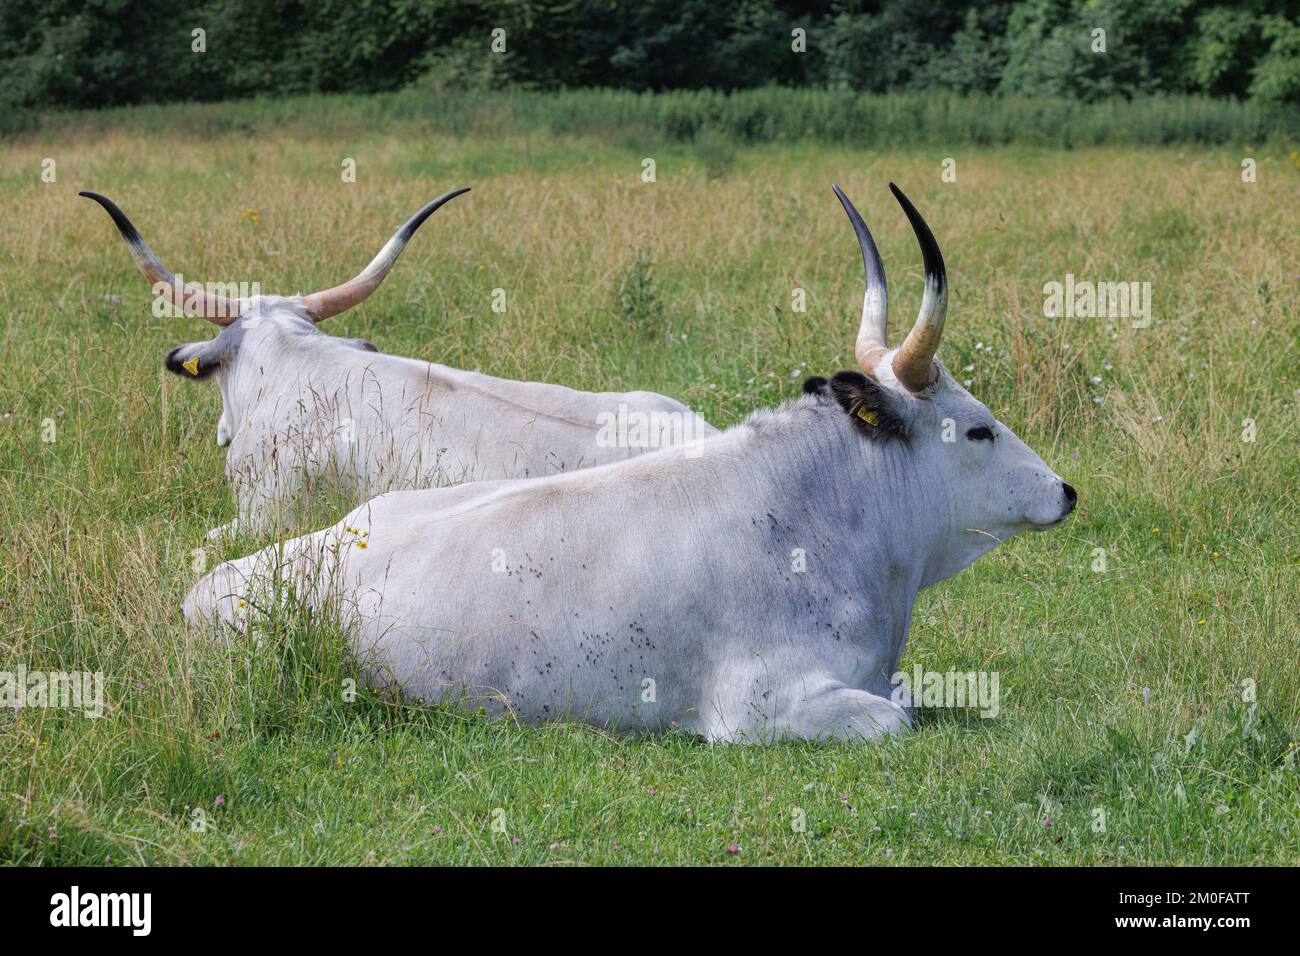 Hungarian Steppe Cattle, Hungarian Grey Cattle, Hungarian Podolian Steppe Cattle (Bos primigenius f. taurus), cows resting in a pasture, ruminating, Stock Photo